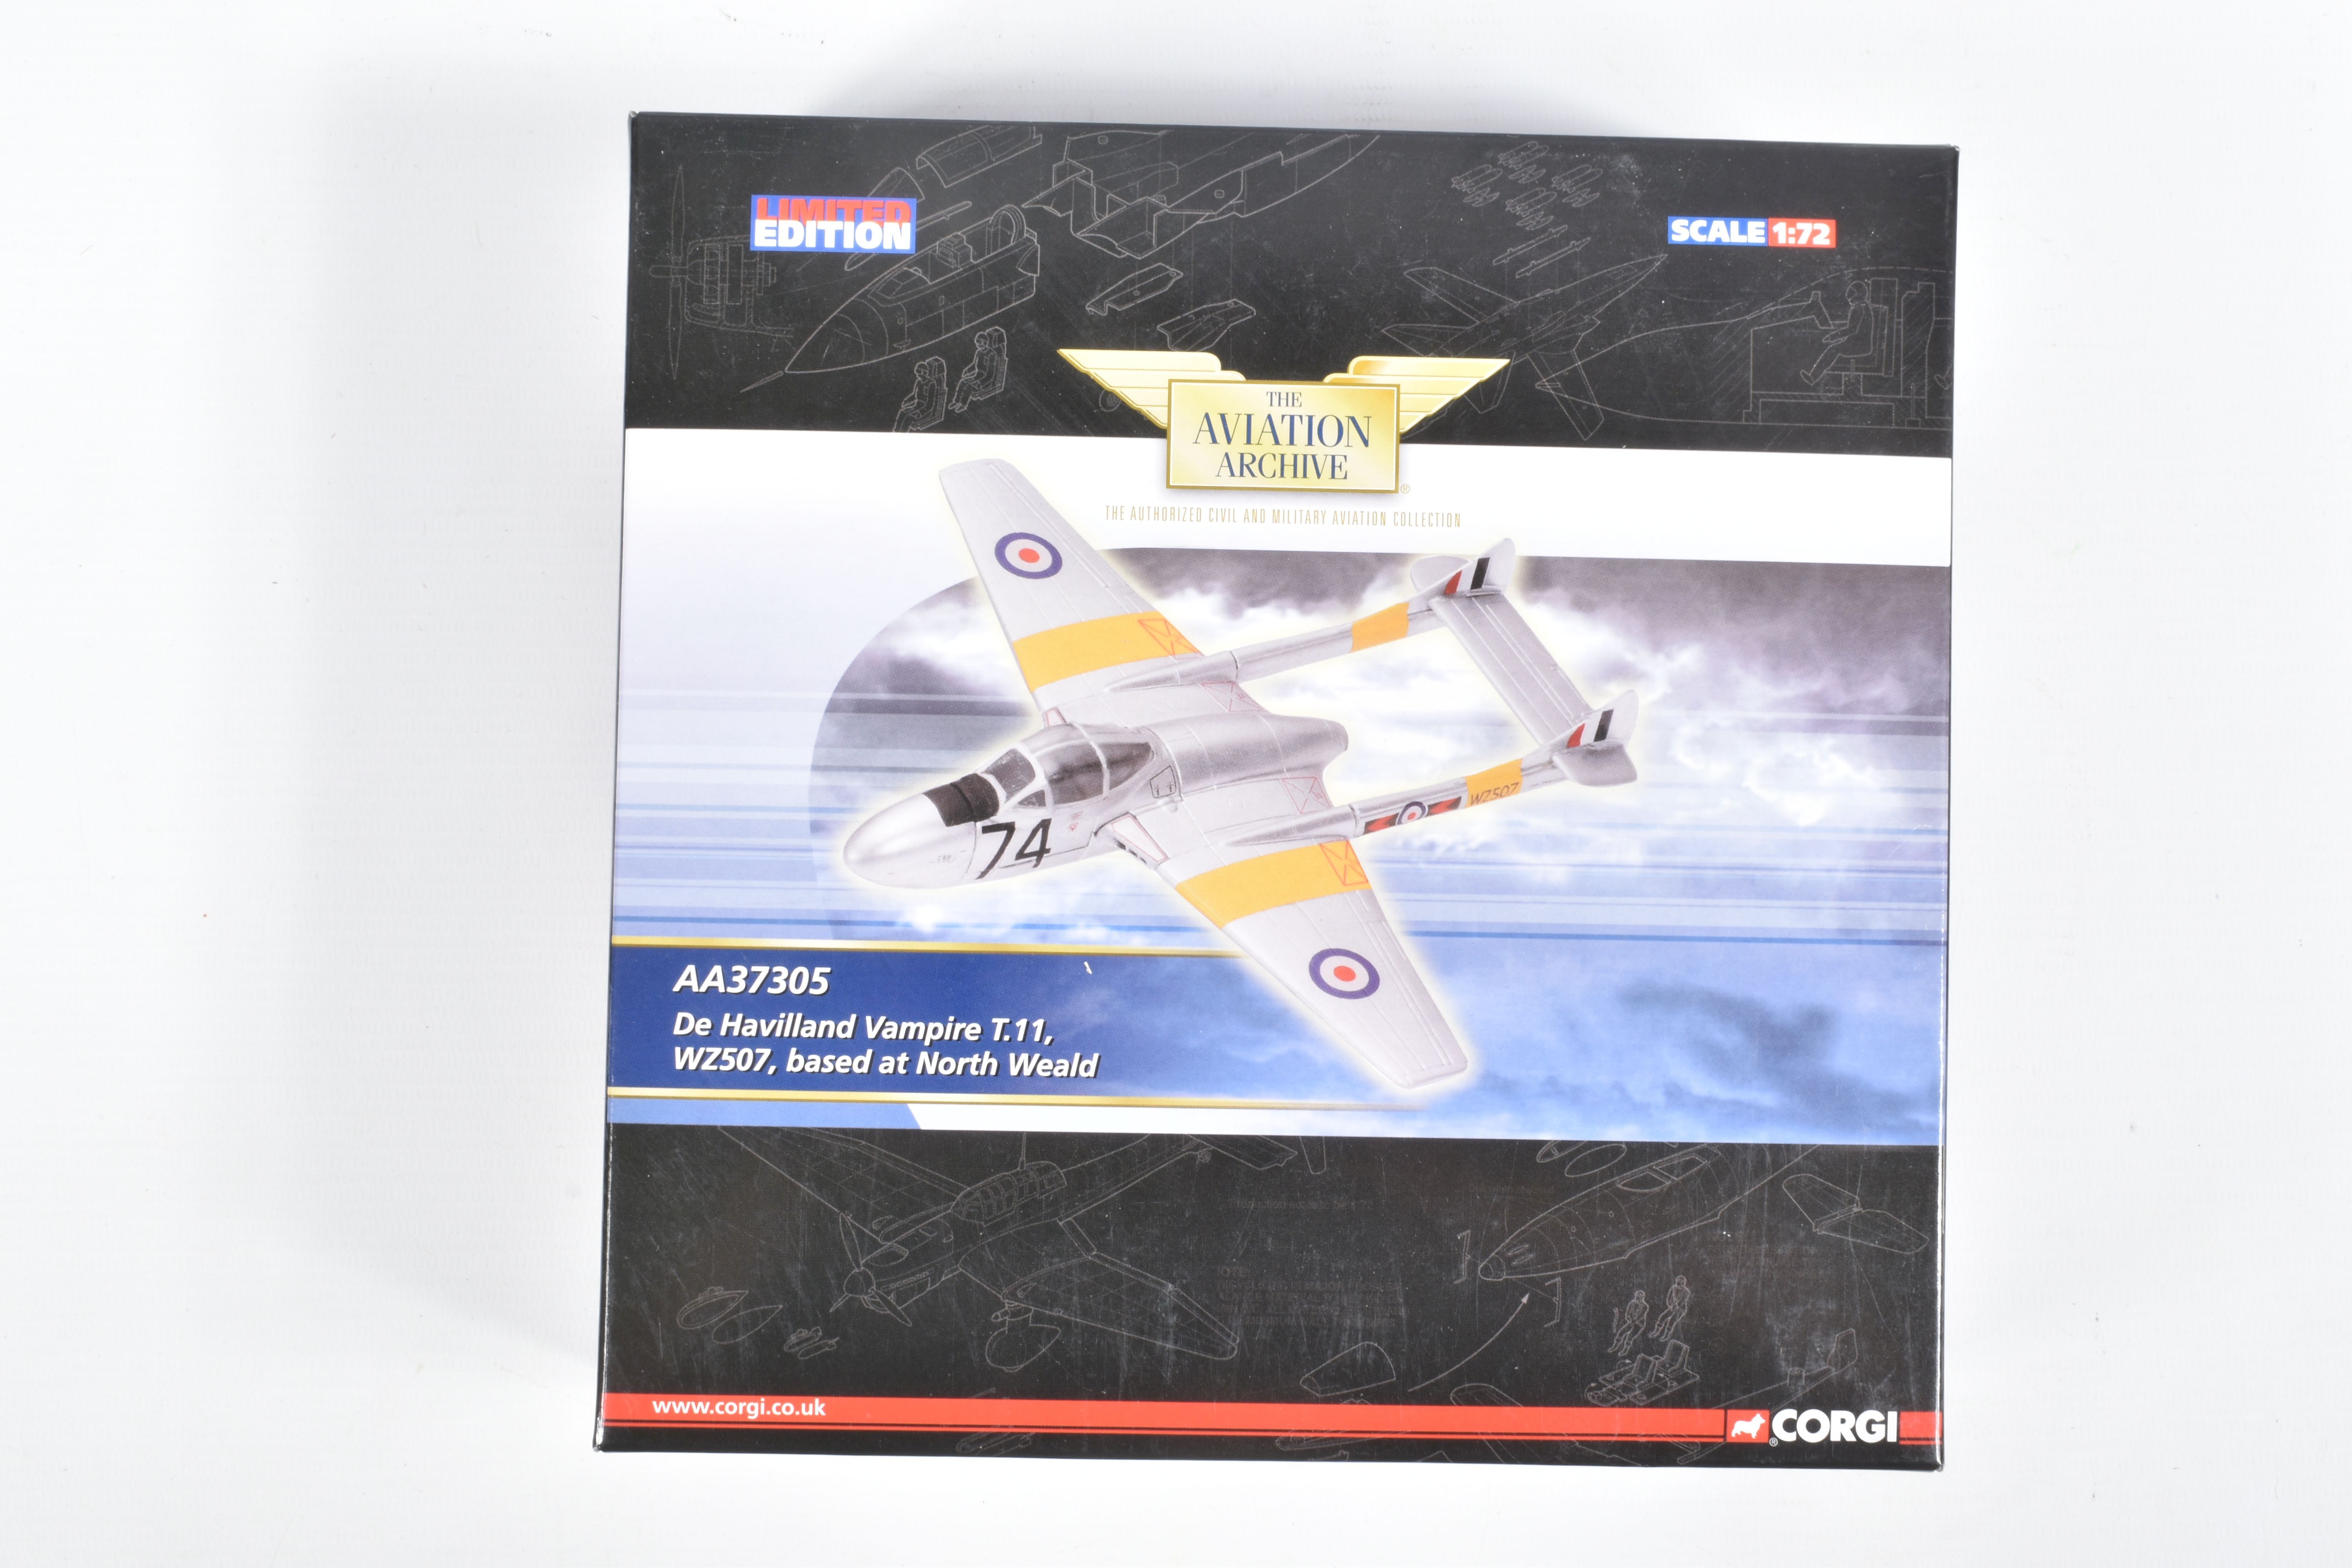 FOUR BOXED 1:27 SCALE LIMITED EDITION CORGI AVIATION ARCHIVE DIECAST MODEL AIRCRAFTS, the first is a - Image 2 of 9